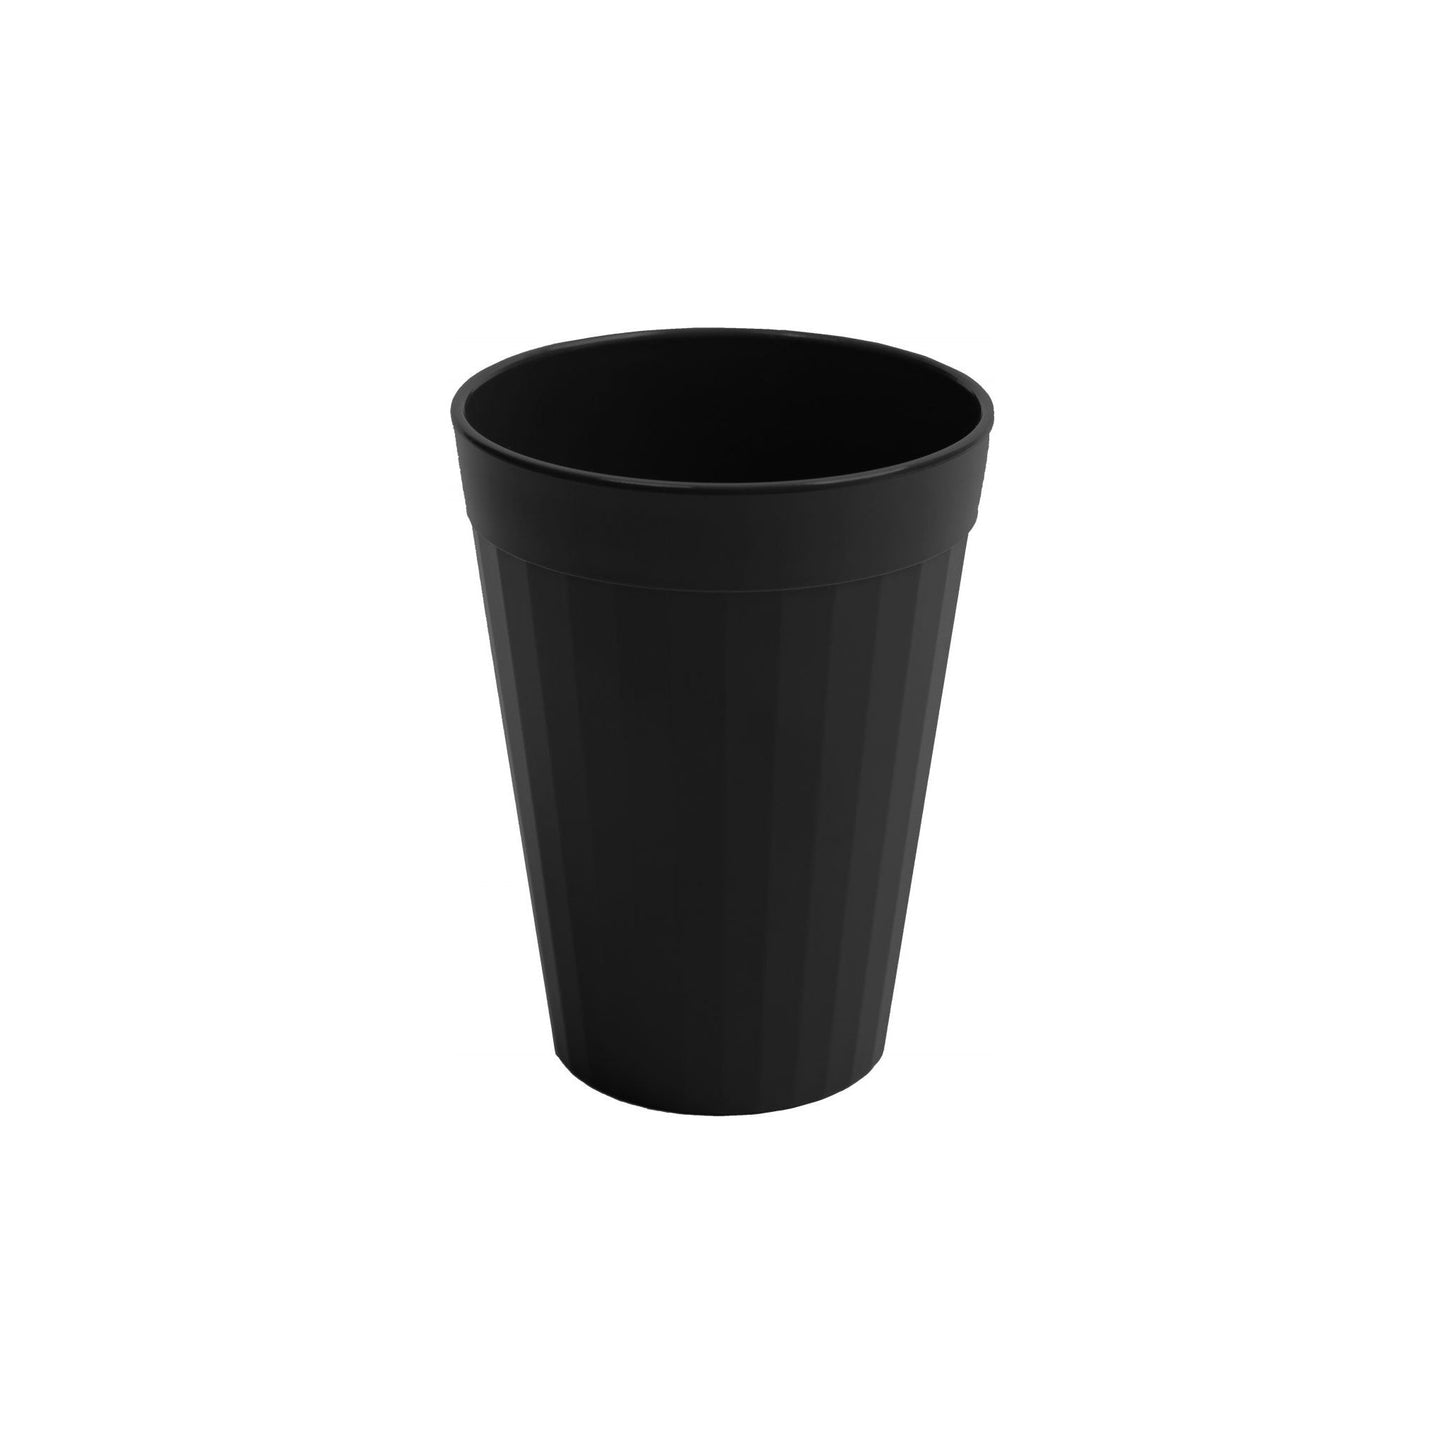 Harfield Polycarbonate Fluted Tumbler 200ml